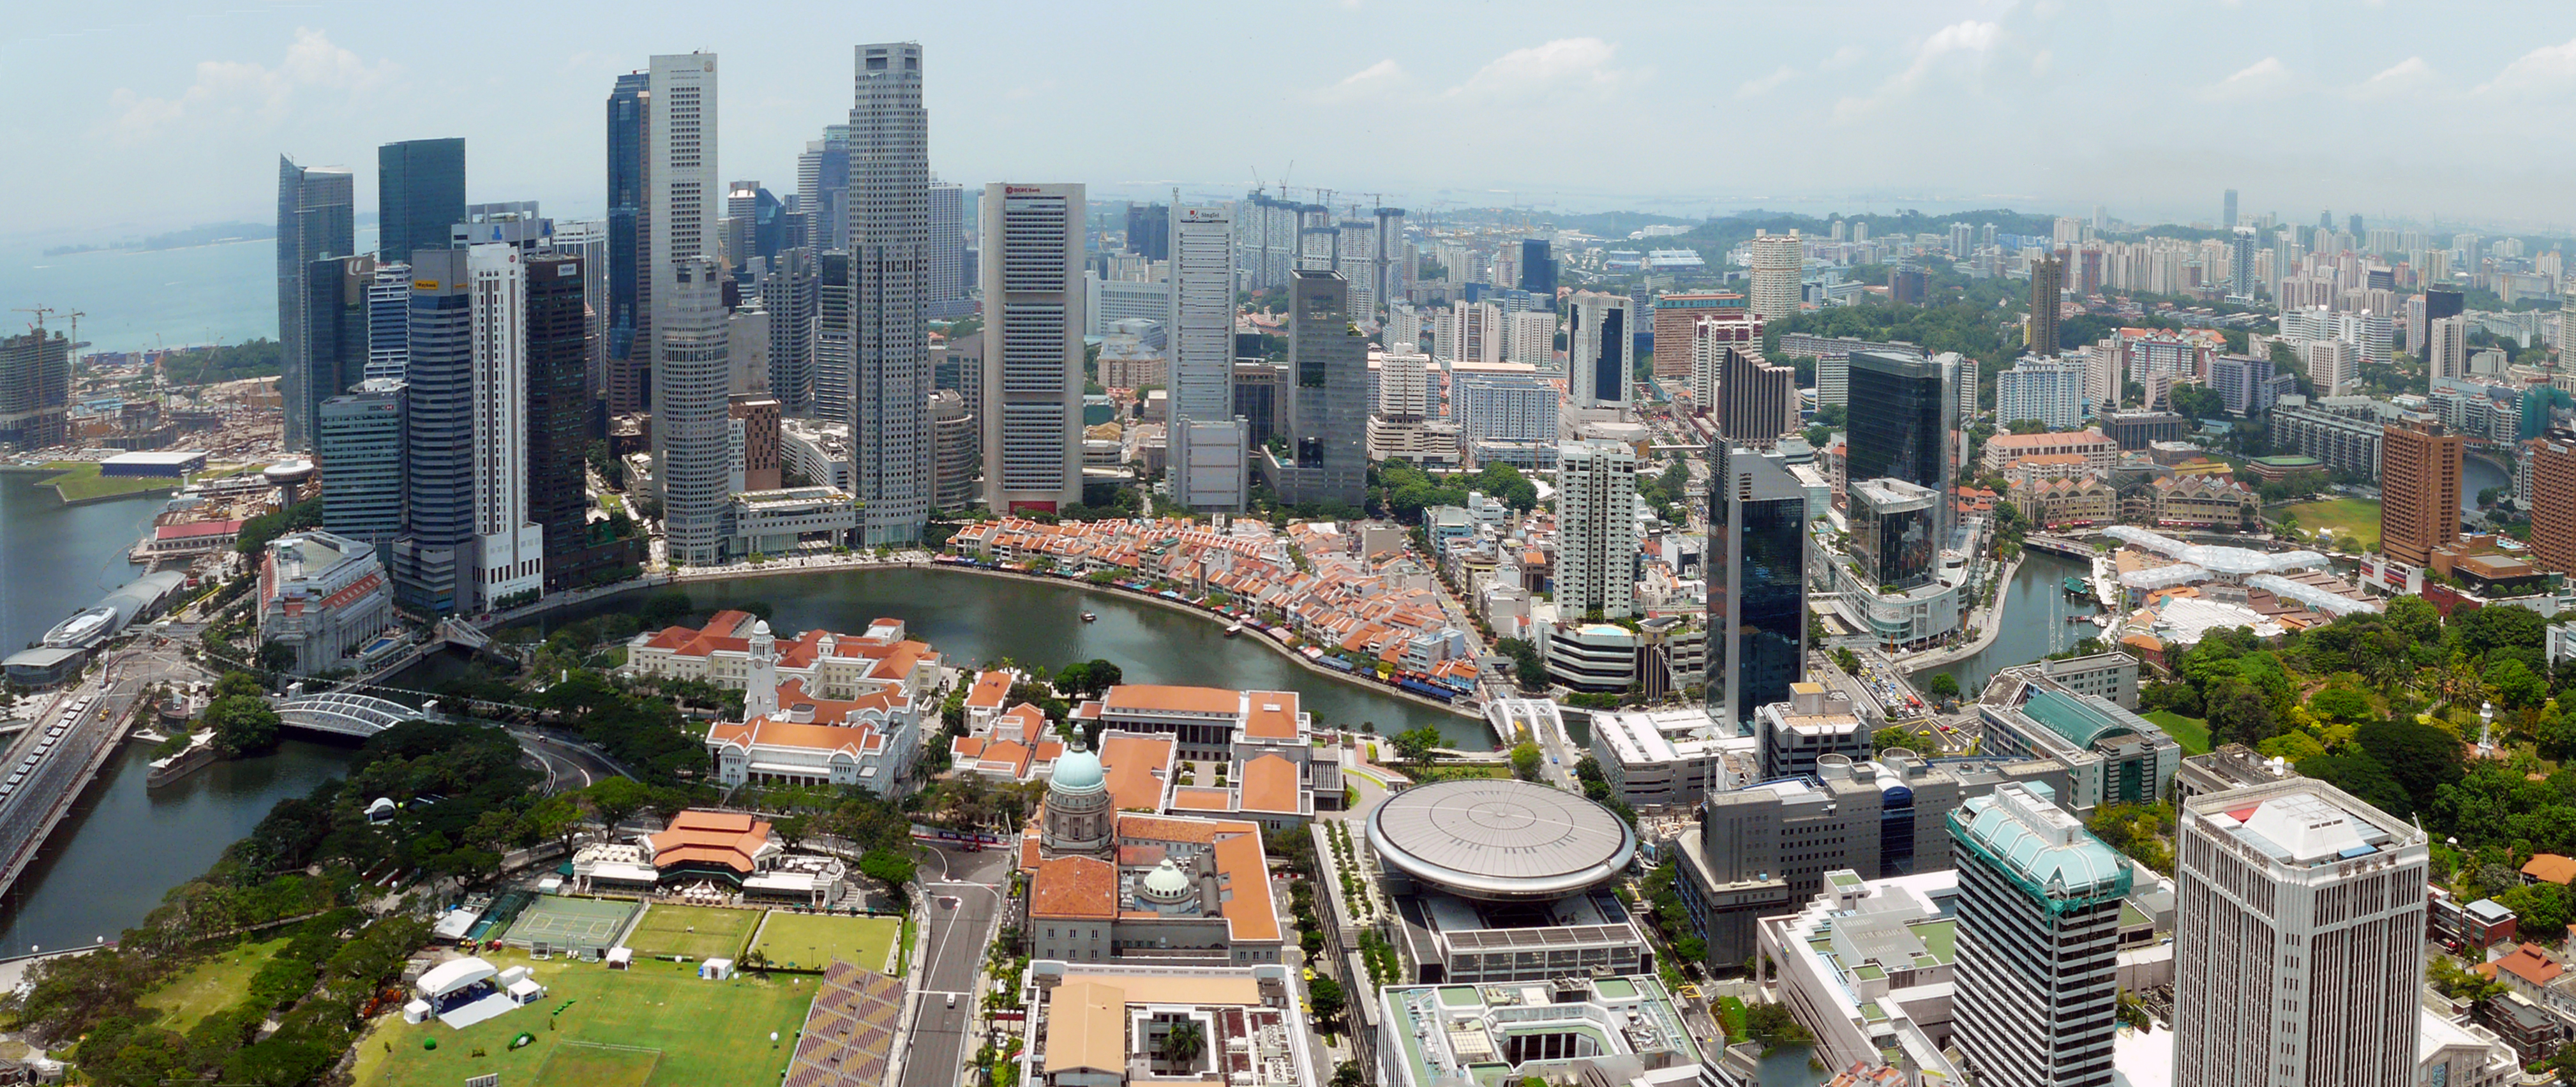 Recommendations to Cope with the High Cost of Living in Singapore